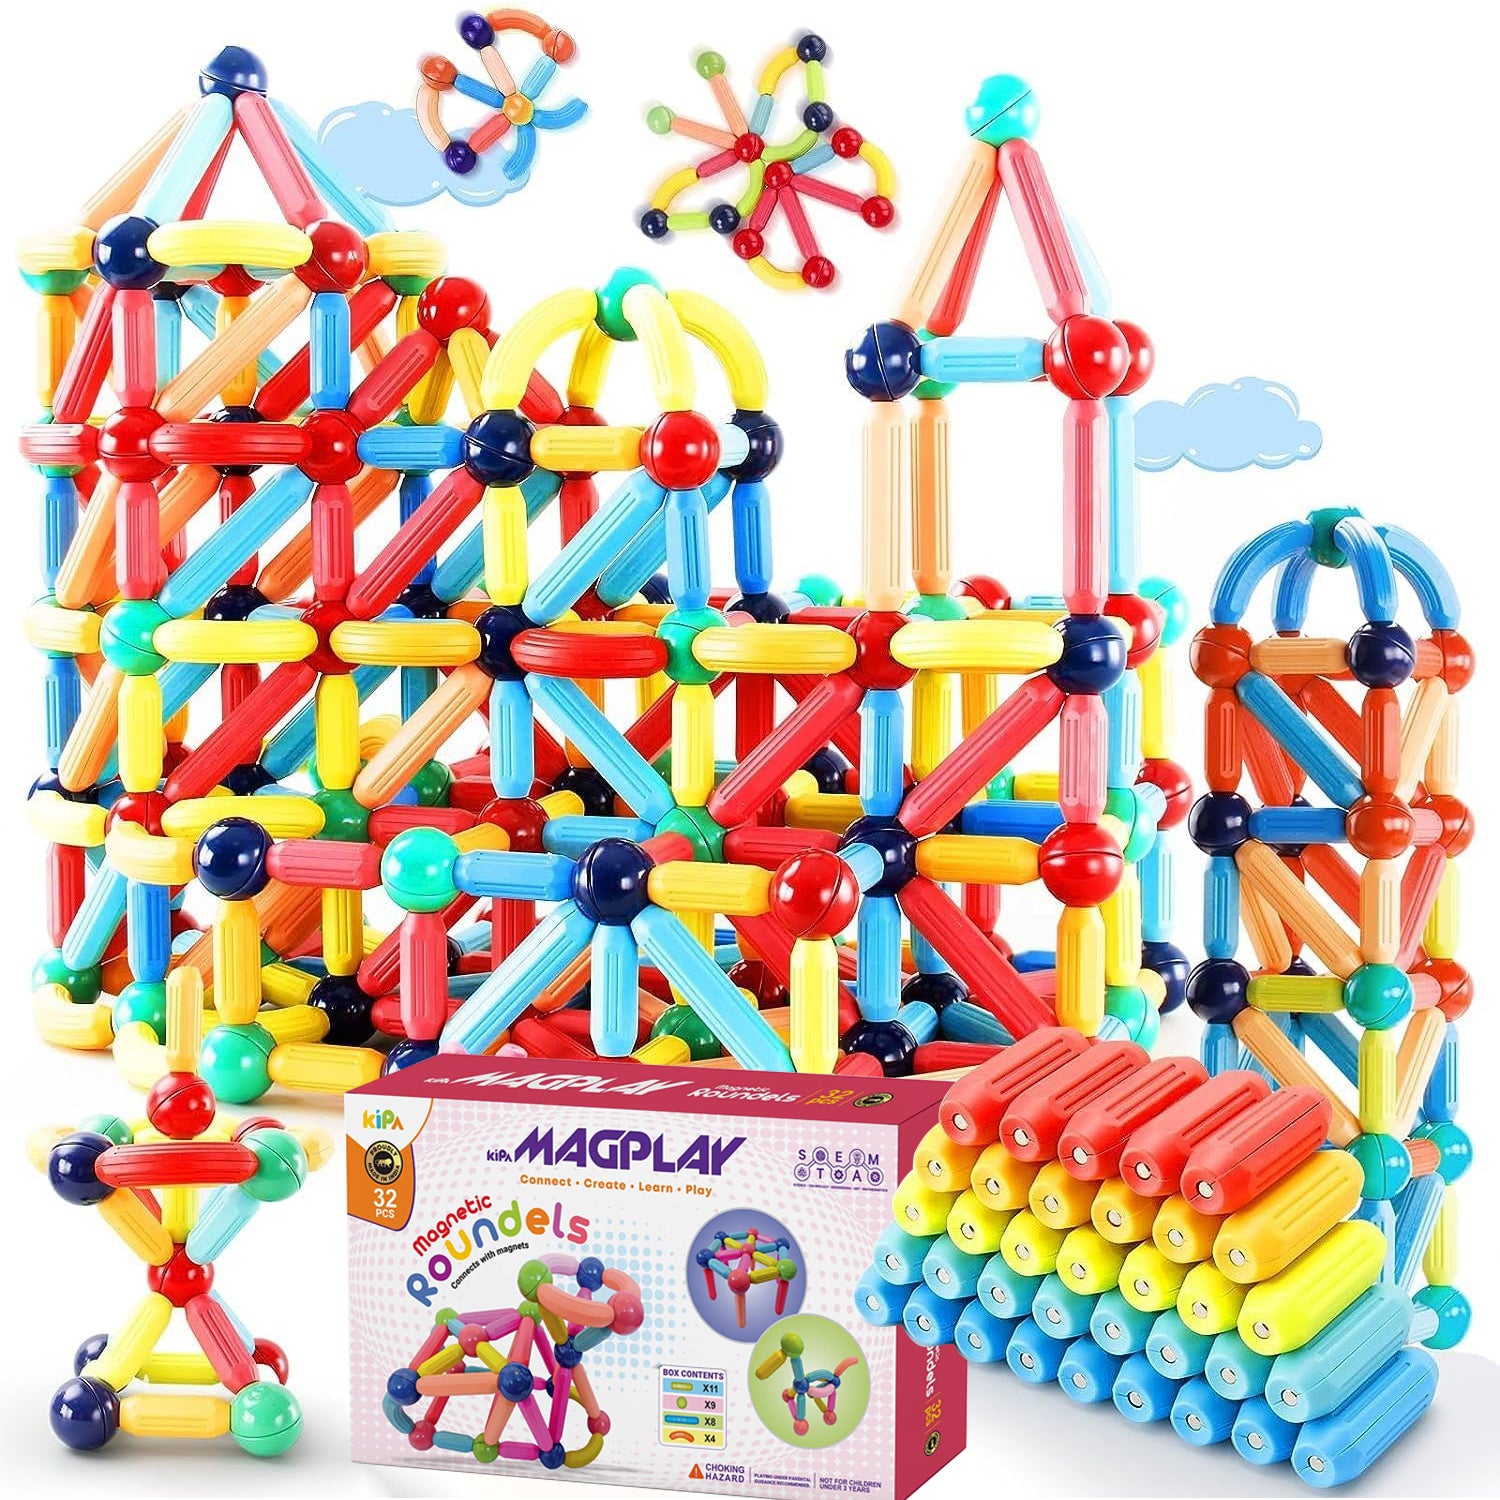 KIPA GAMING MagPlay Magnetic Sticks and Balls: 32-Piece Magnetic Building Set - Educational STEAM Toy for Toddlers (3+ Years) - Montessori Learning and Construction Kit